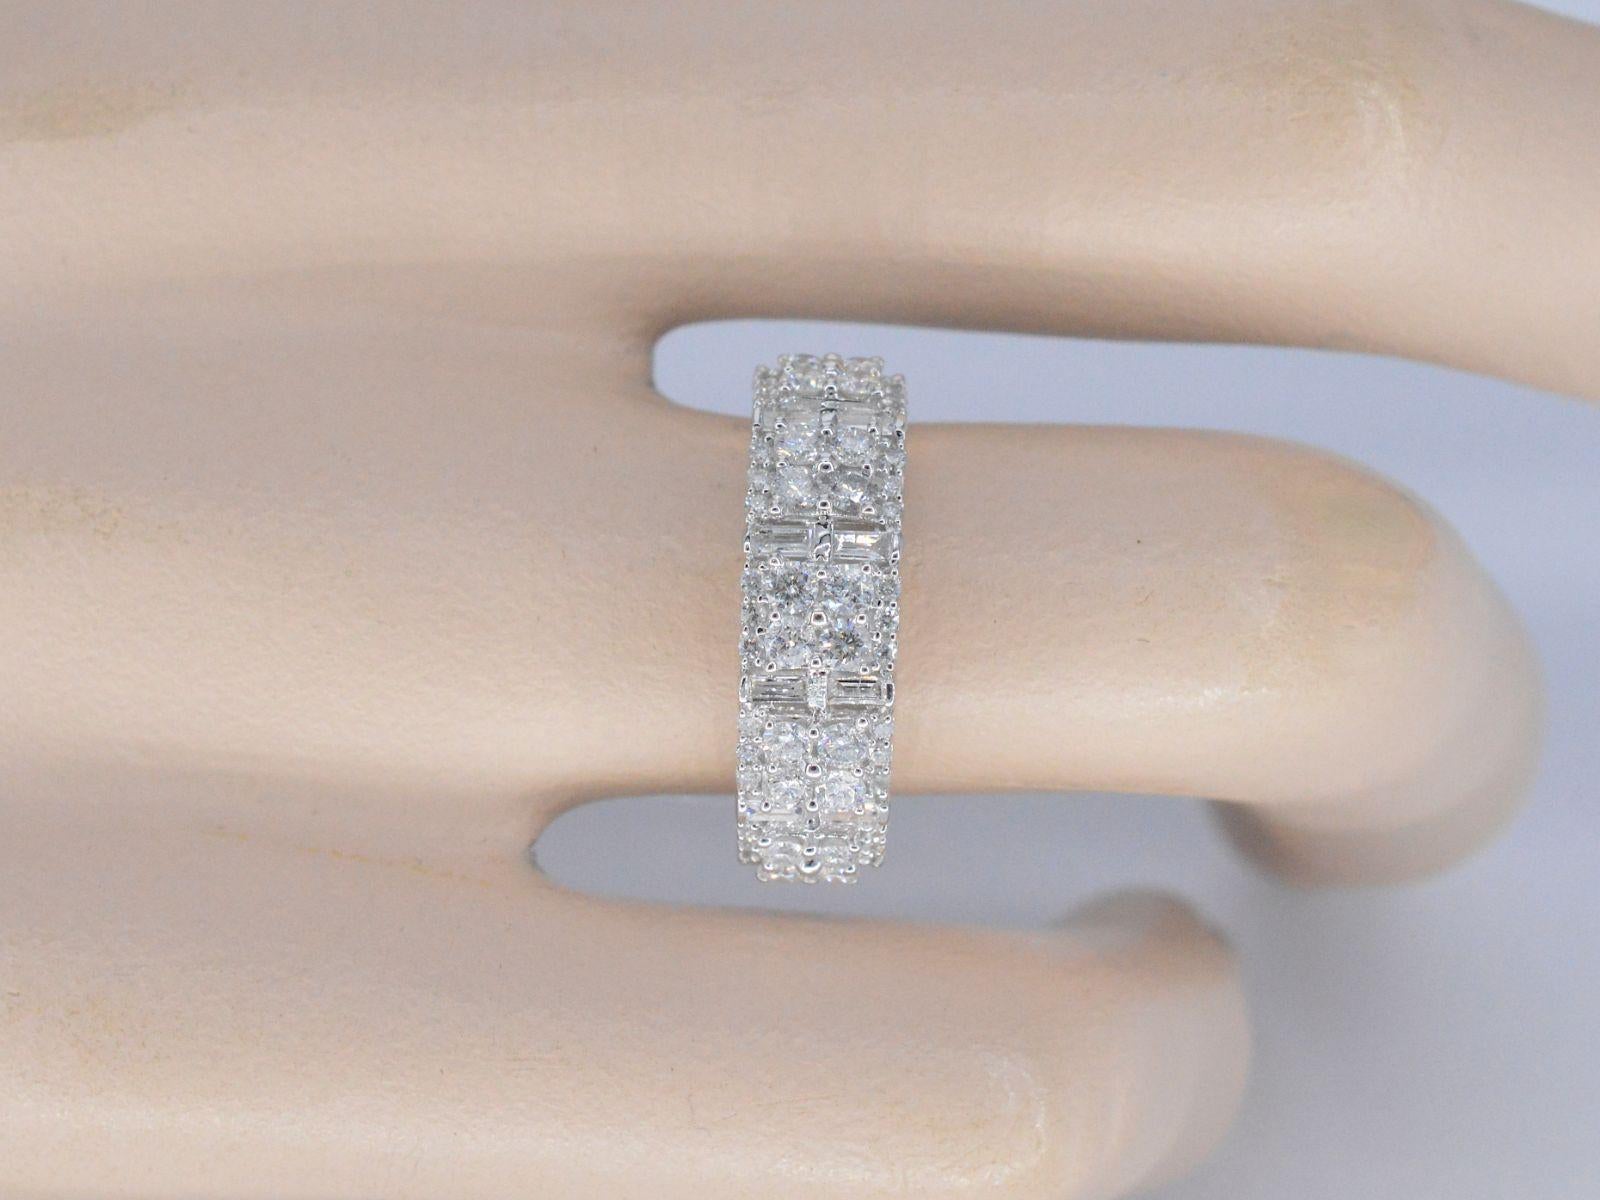 This stunning white gold ring features a combination of 1.10 carats of brilliant and baguette cut diamonds arranged in a breathtaking pave setting. The diamonds create a beautiful and seamless surface of dazzling gems that sparkle brilliantly in the